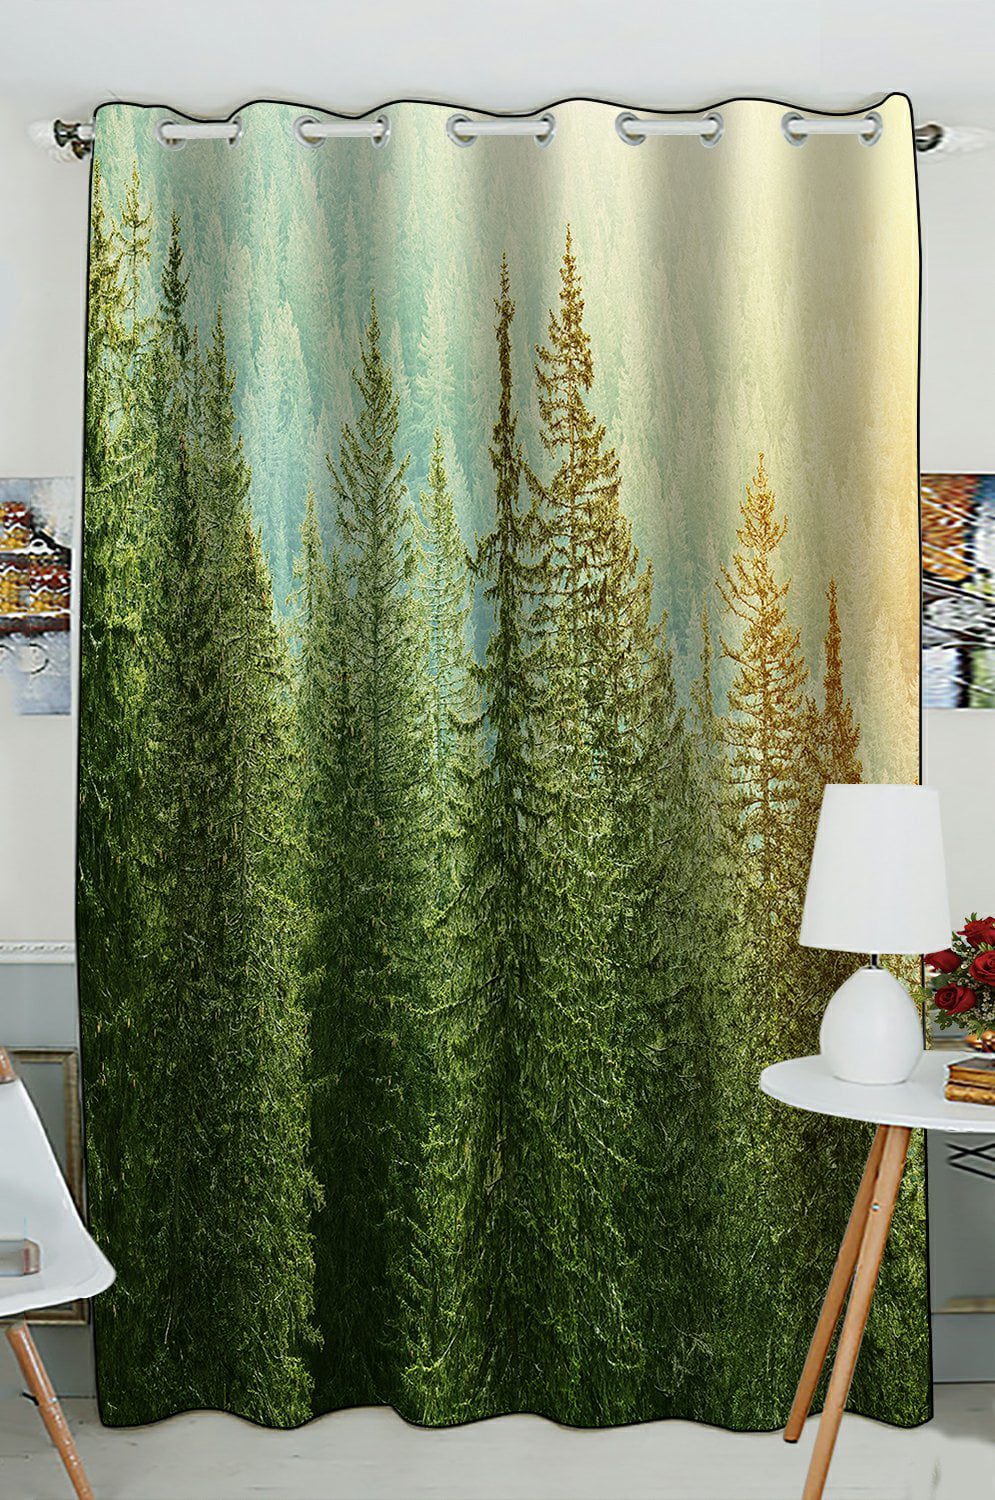 PHFZK Landscape Window Curtain, Green Trees in a Forest at Sunset ...